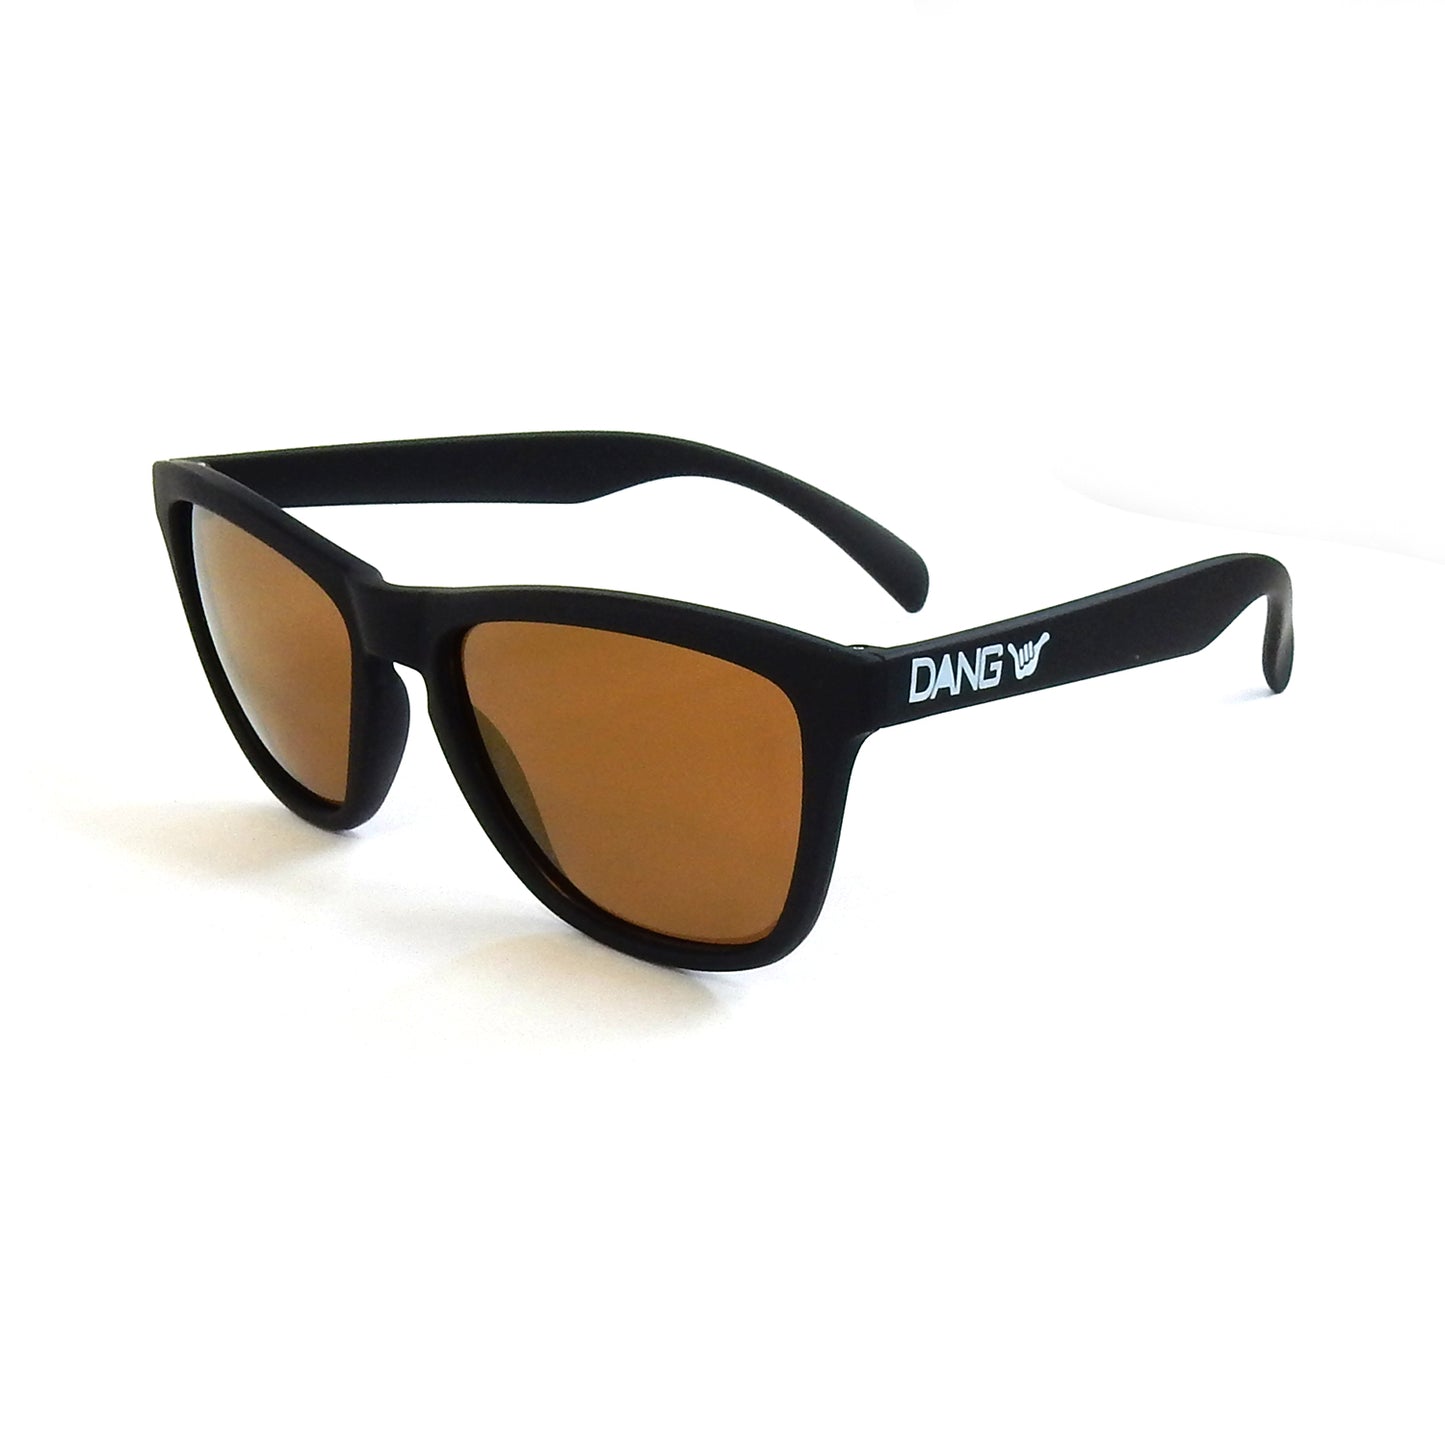 ORIGINAL Black Soft X Bronze Mirror Polarized with ONE HANG LOOSE [DANGSHADES 10th Anv Model]